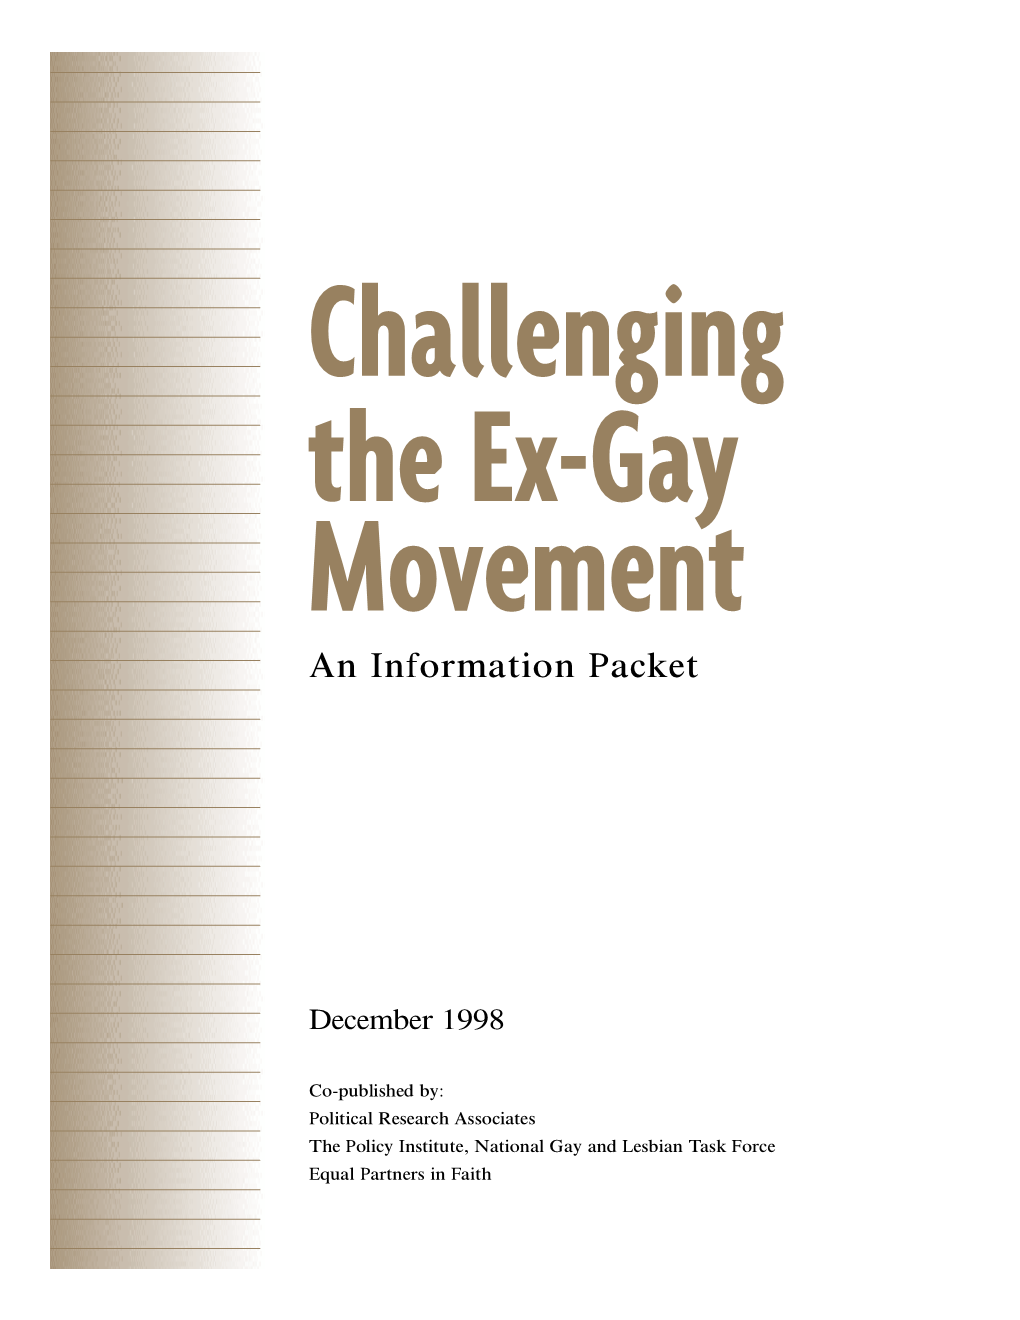 Challenging the Ex-Gay Movement